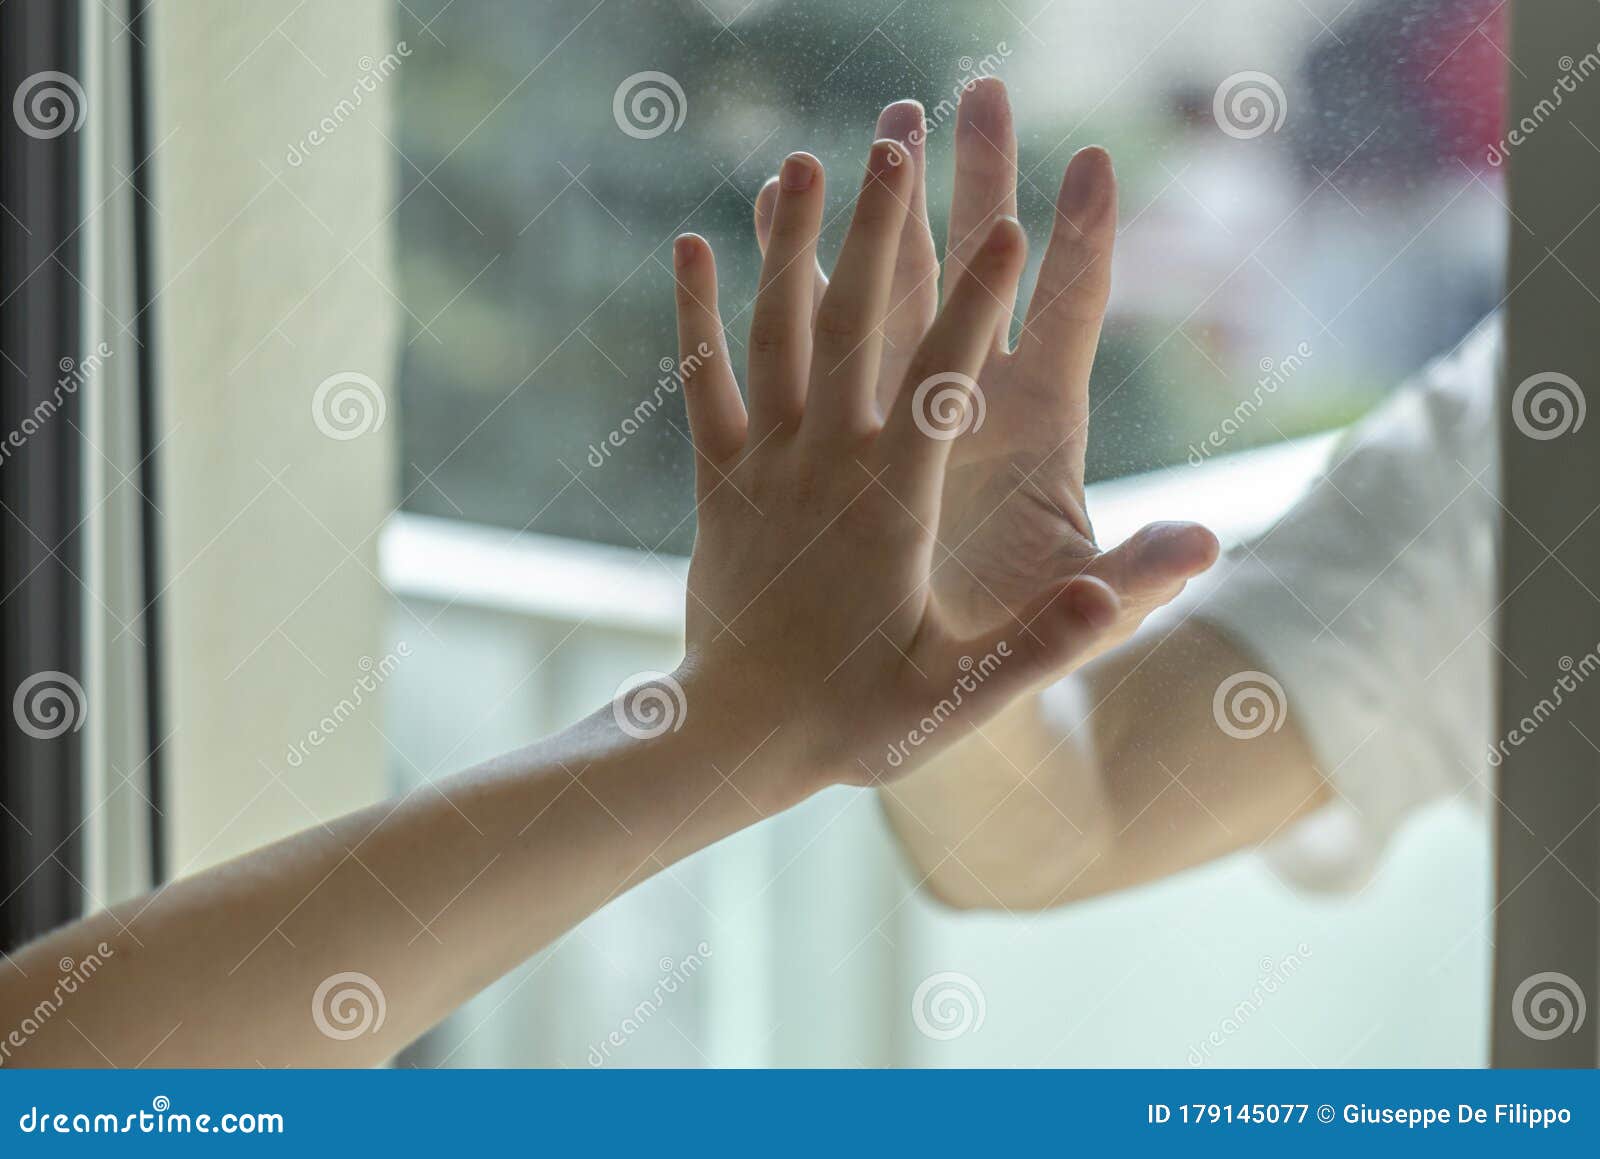 hands separated by a glass window for social distancing during the corona virus lockdown